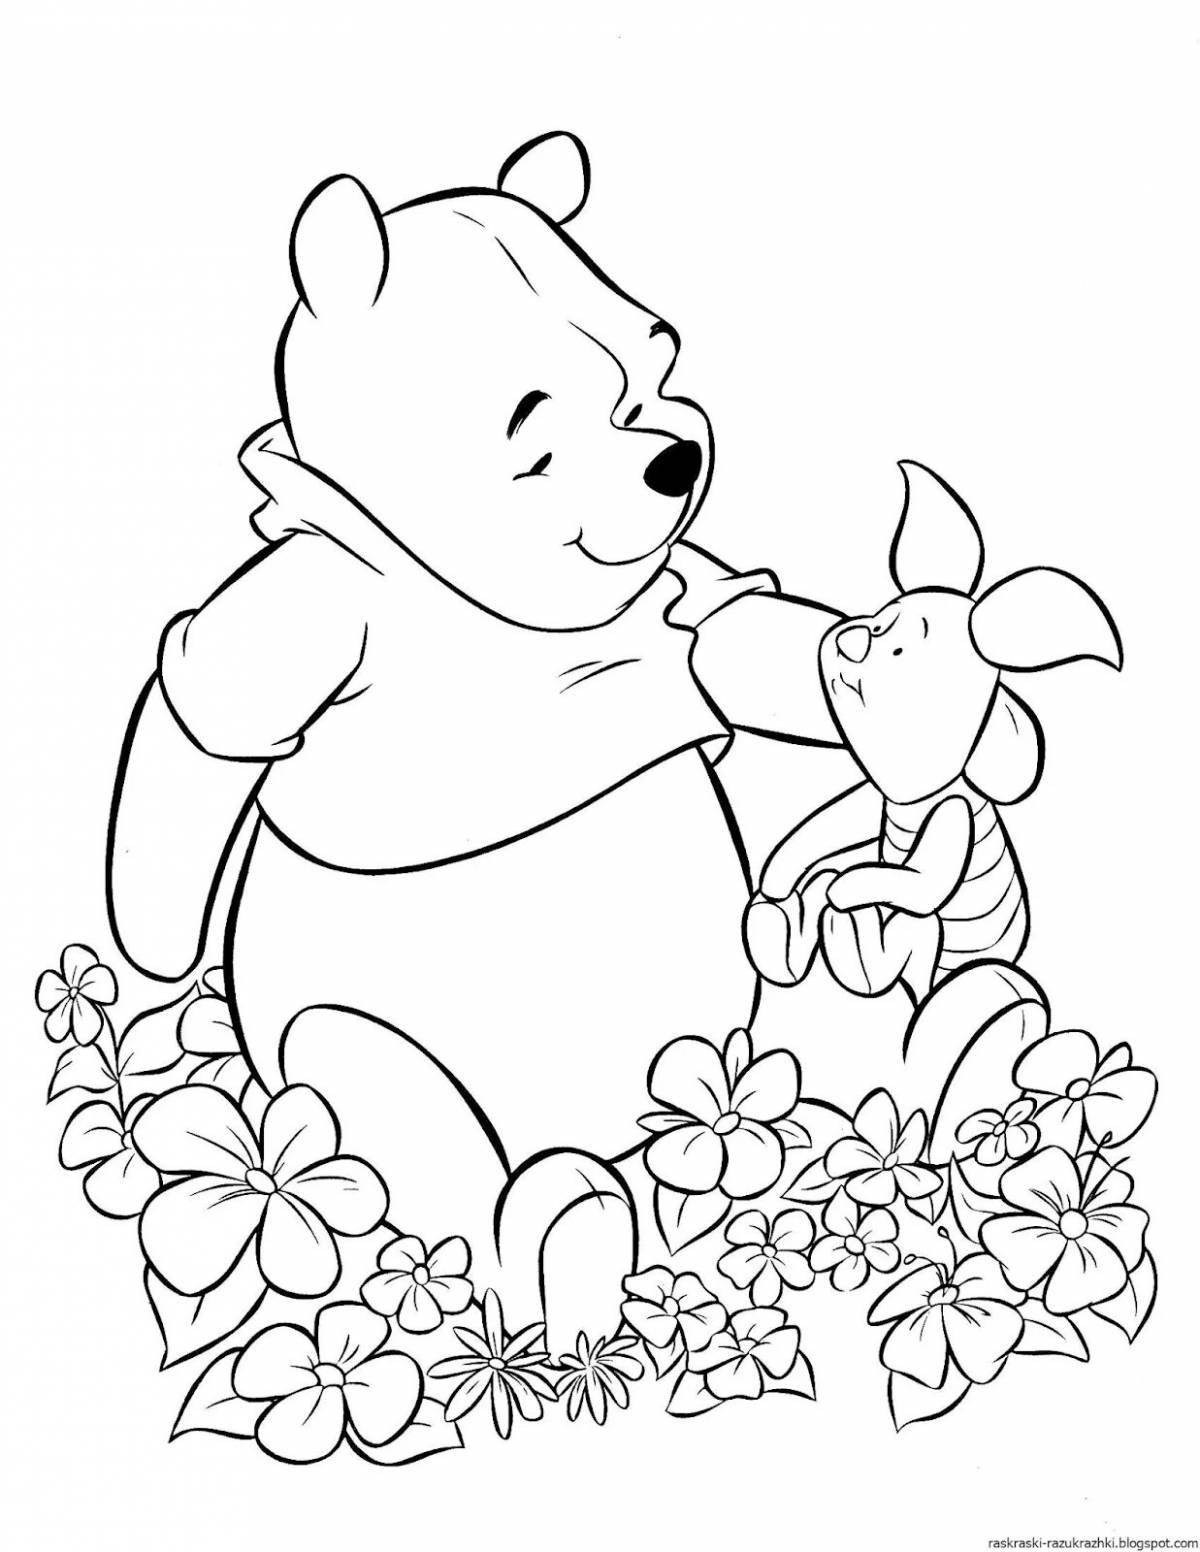 Winnie the pooh for kids #10